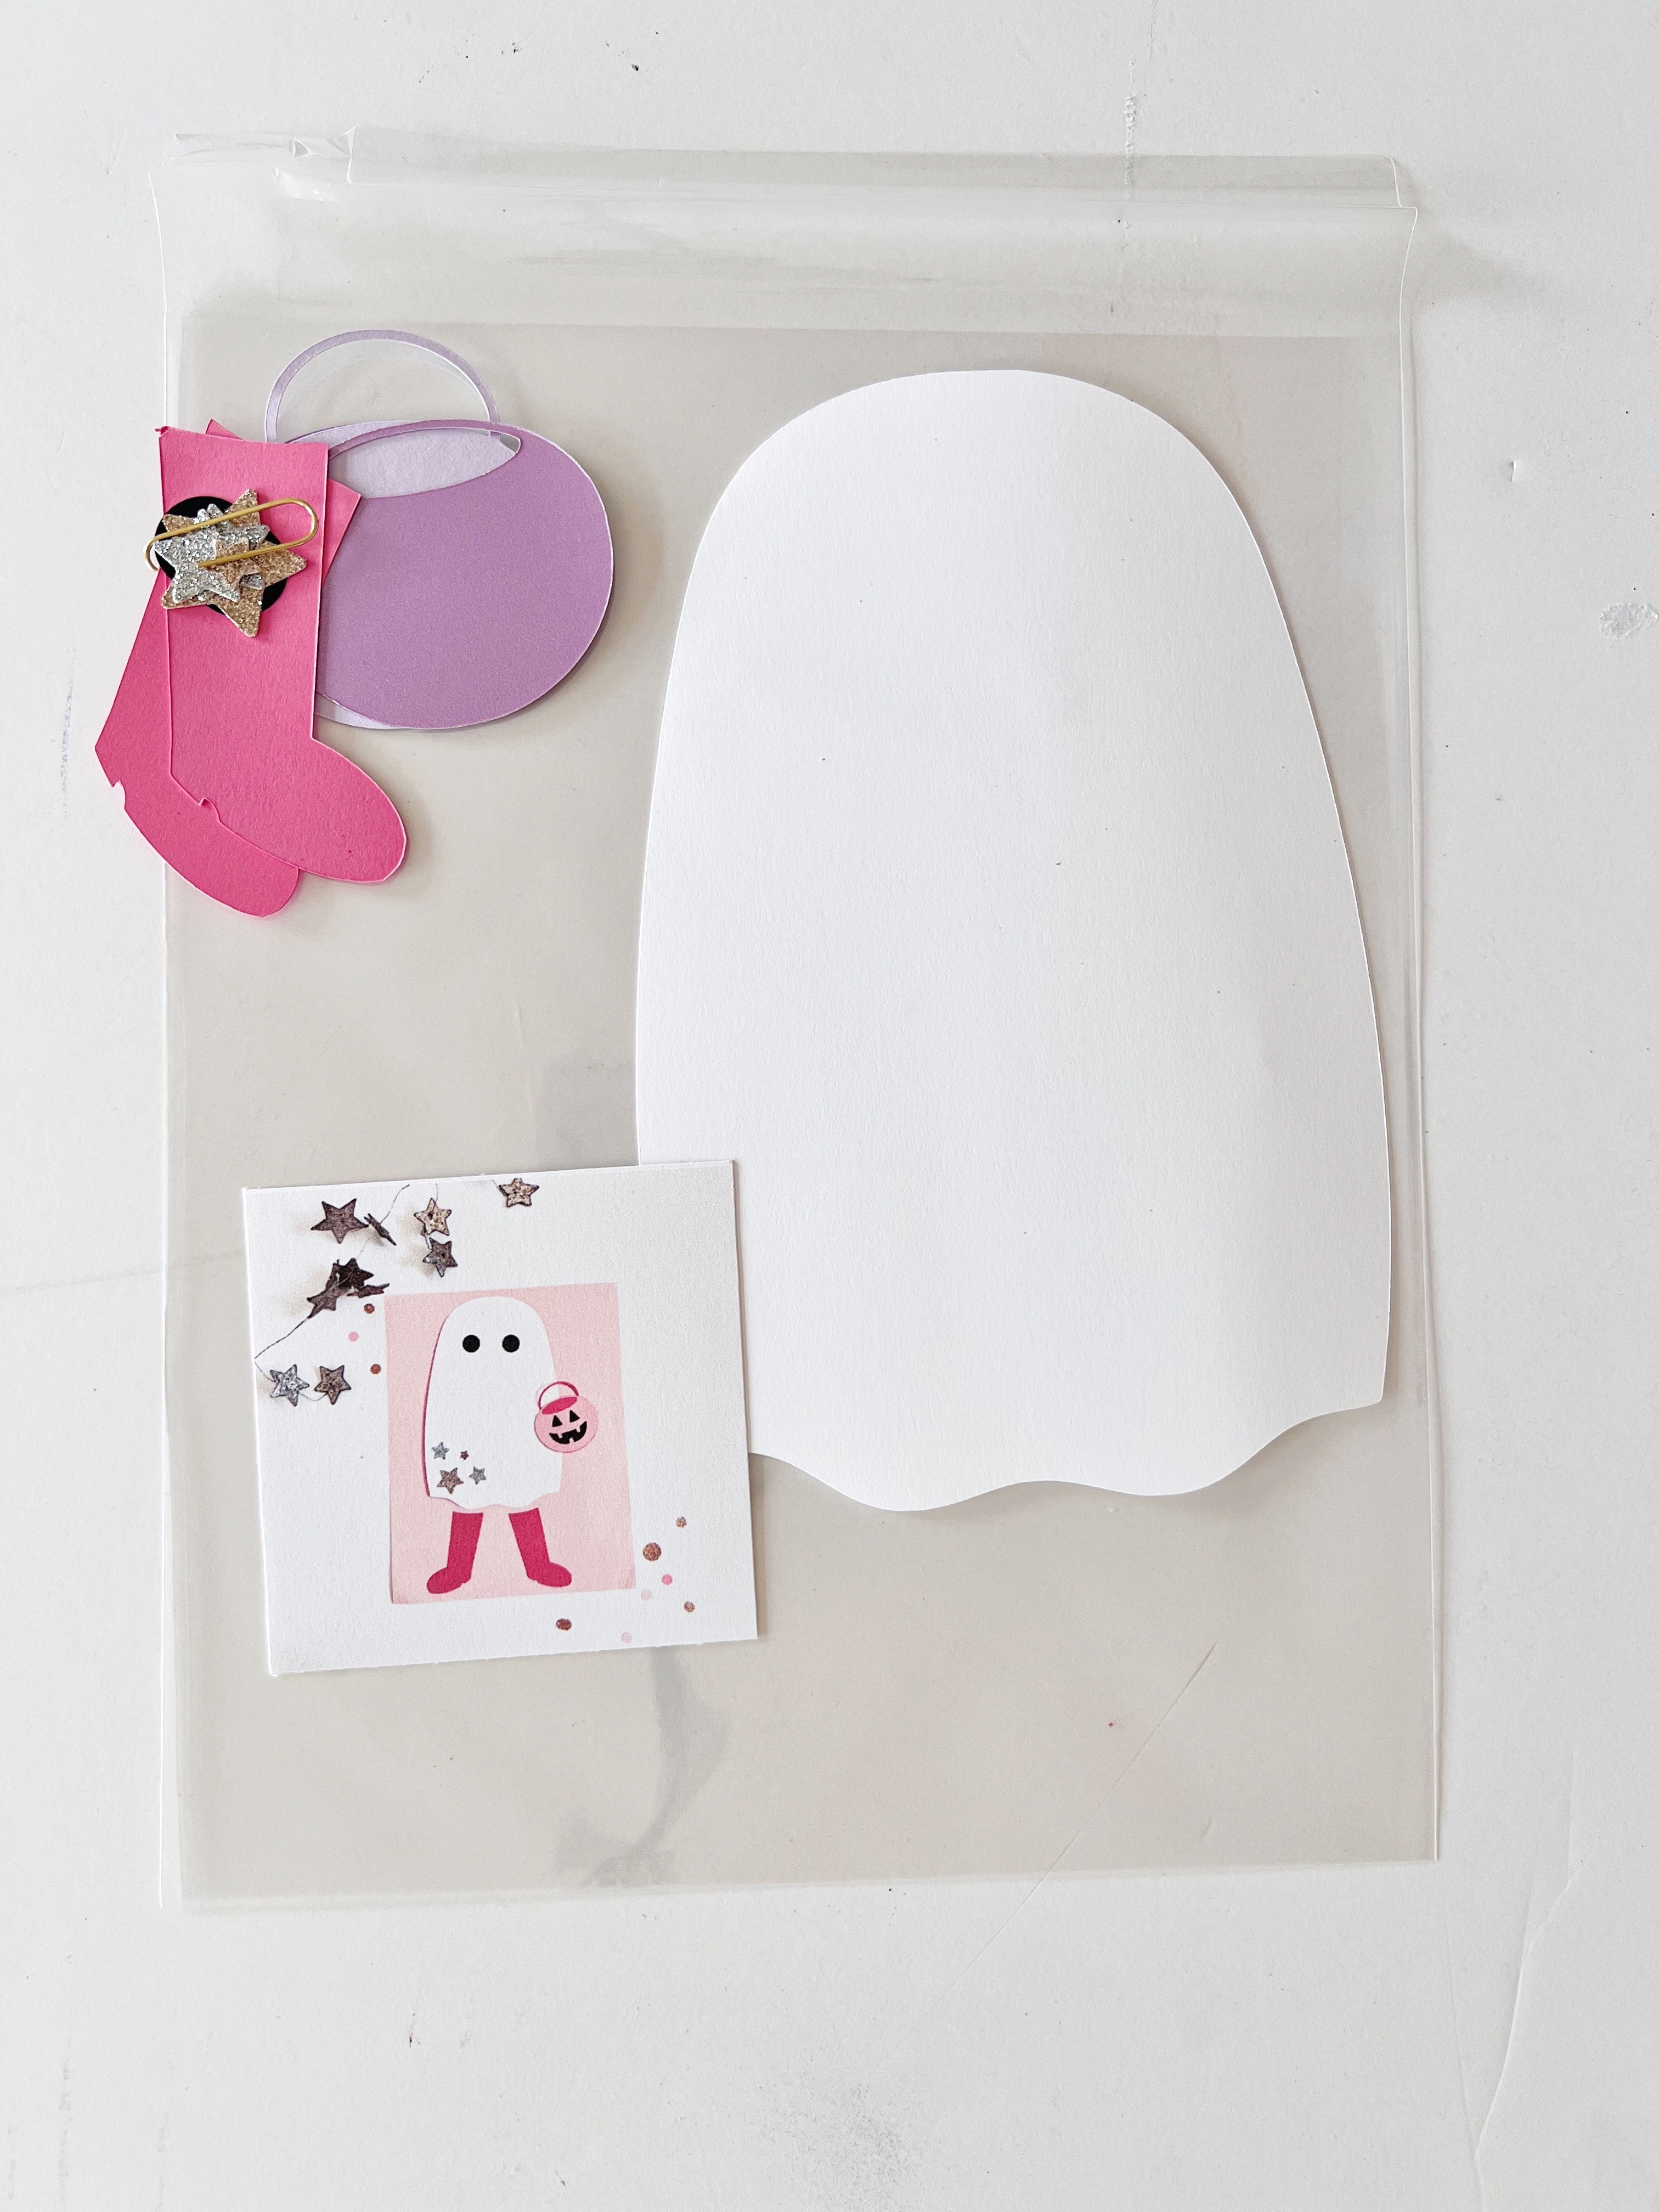 halloween crafts for kids kits